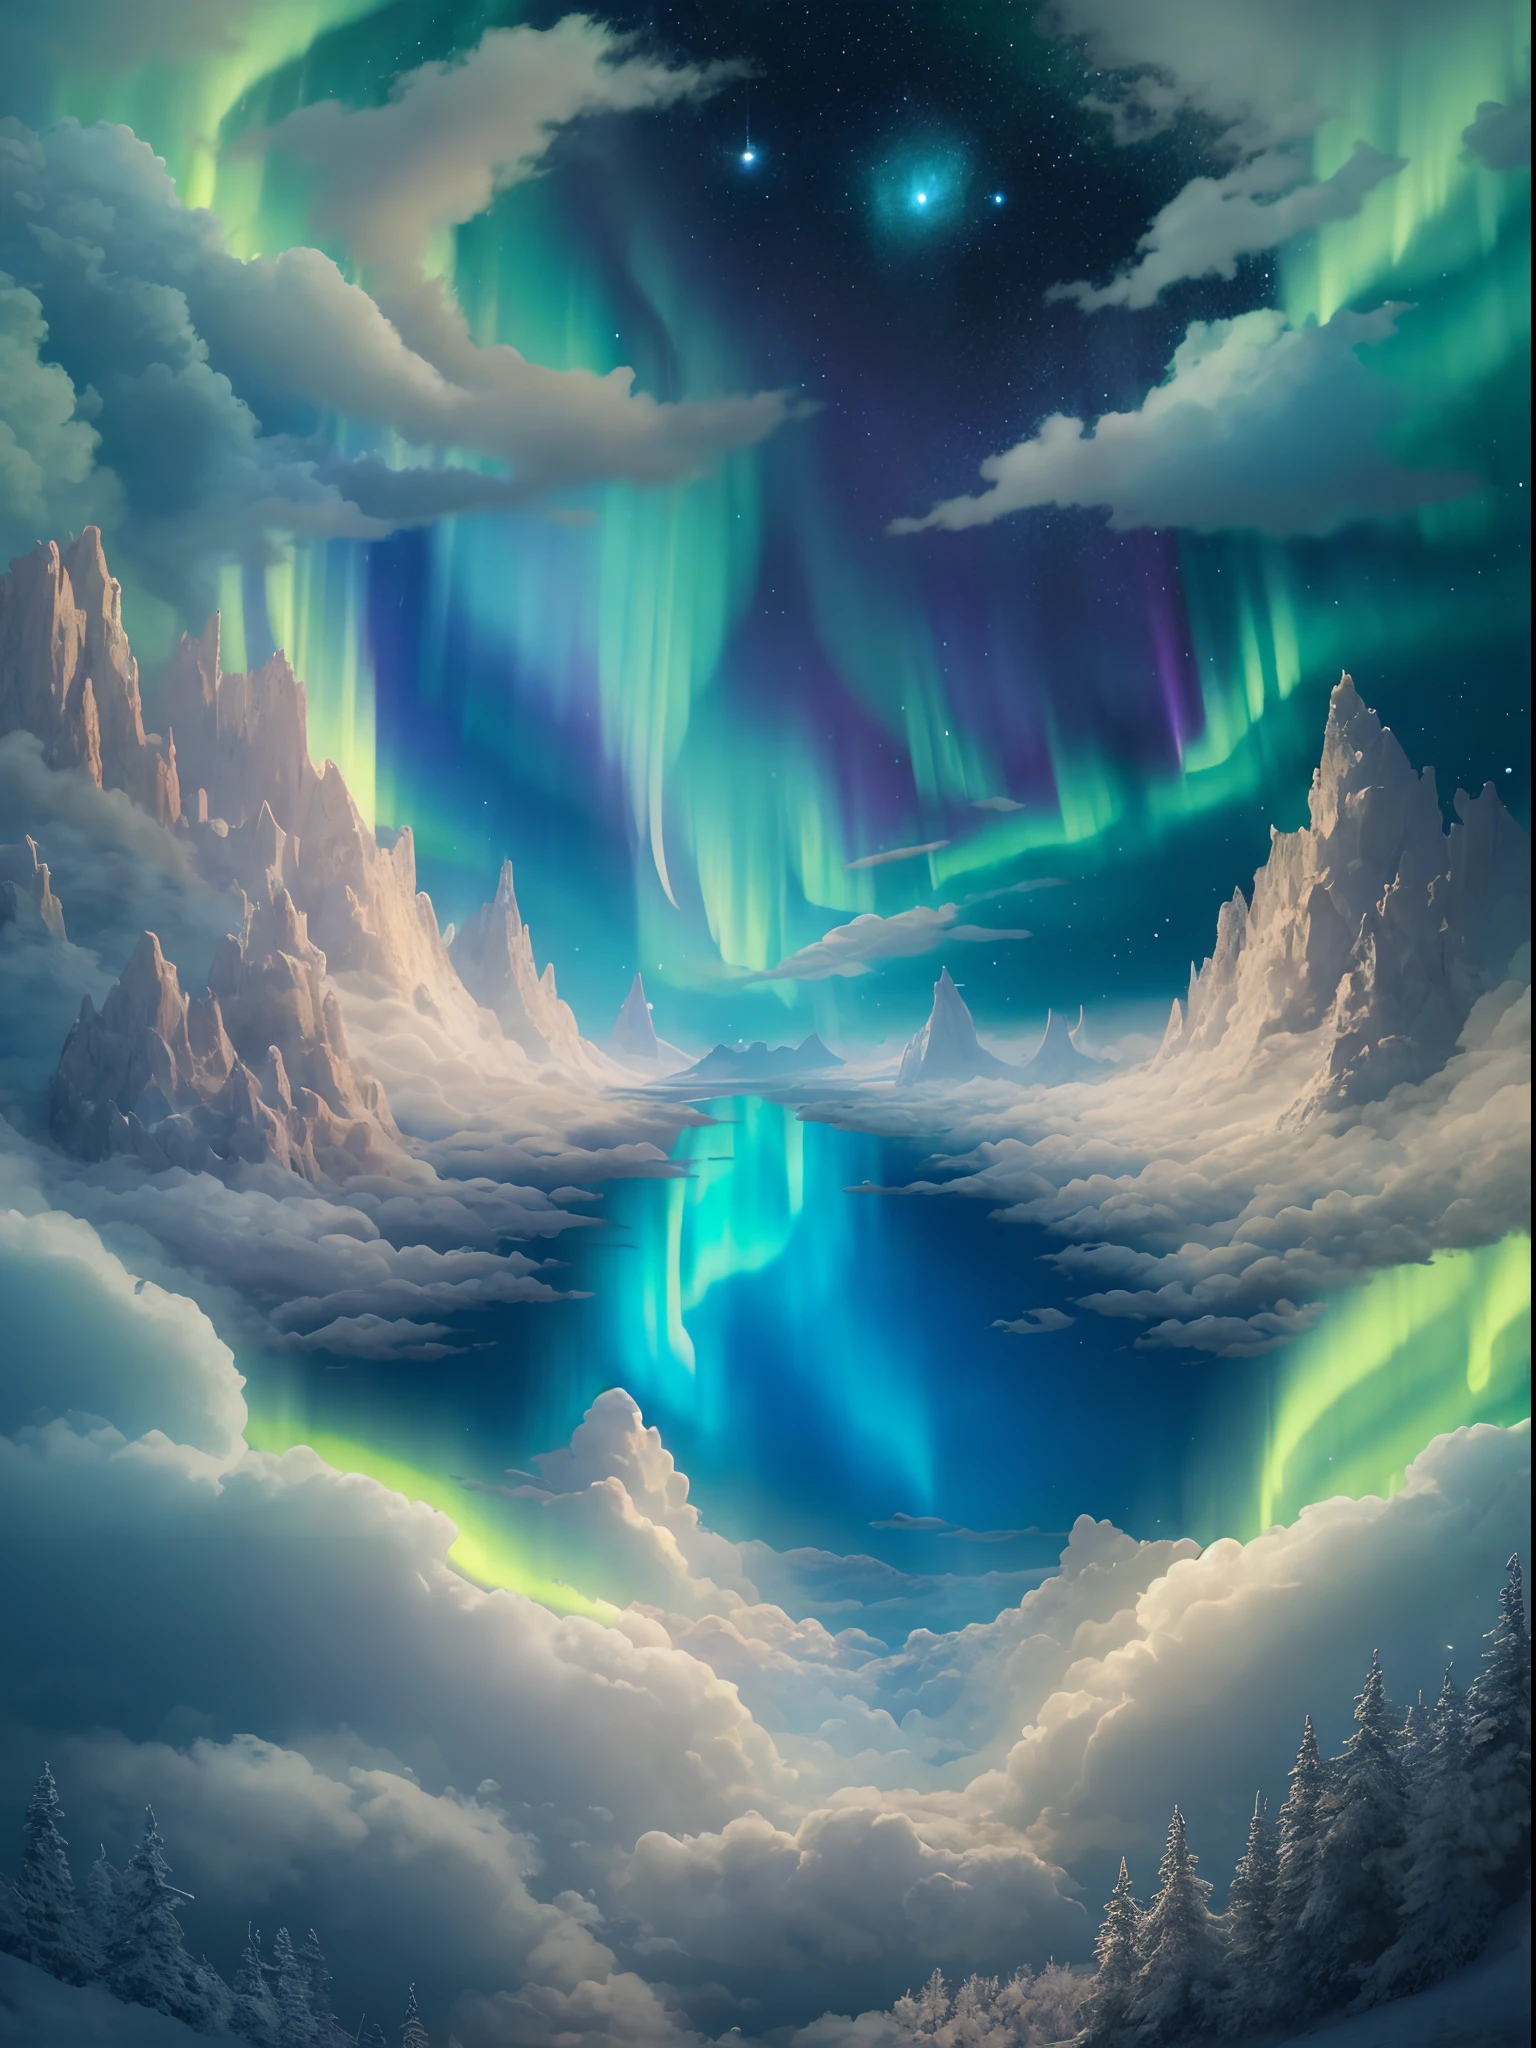 In a dreamlike land above the clouds, nature abounds. The sky is a brilliant shade of blue, and beautiful aurora clouds shimmer in the light. It’s a magical place, full of wonder and beauty.